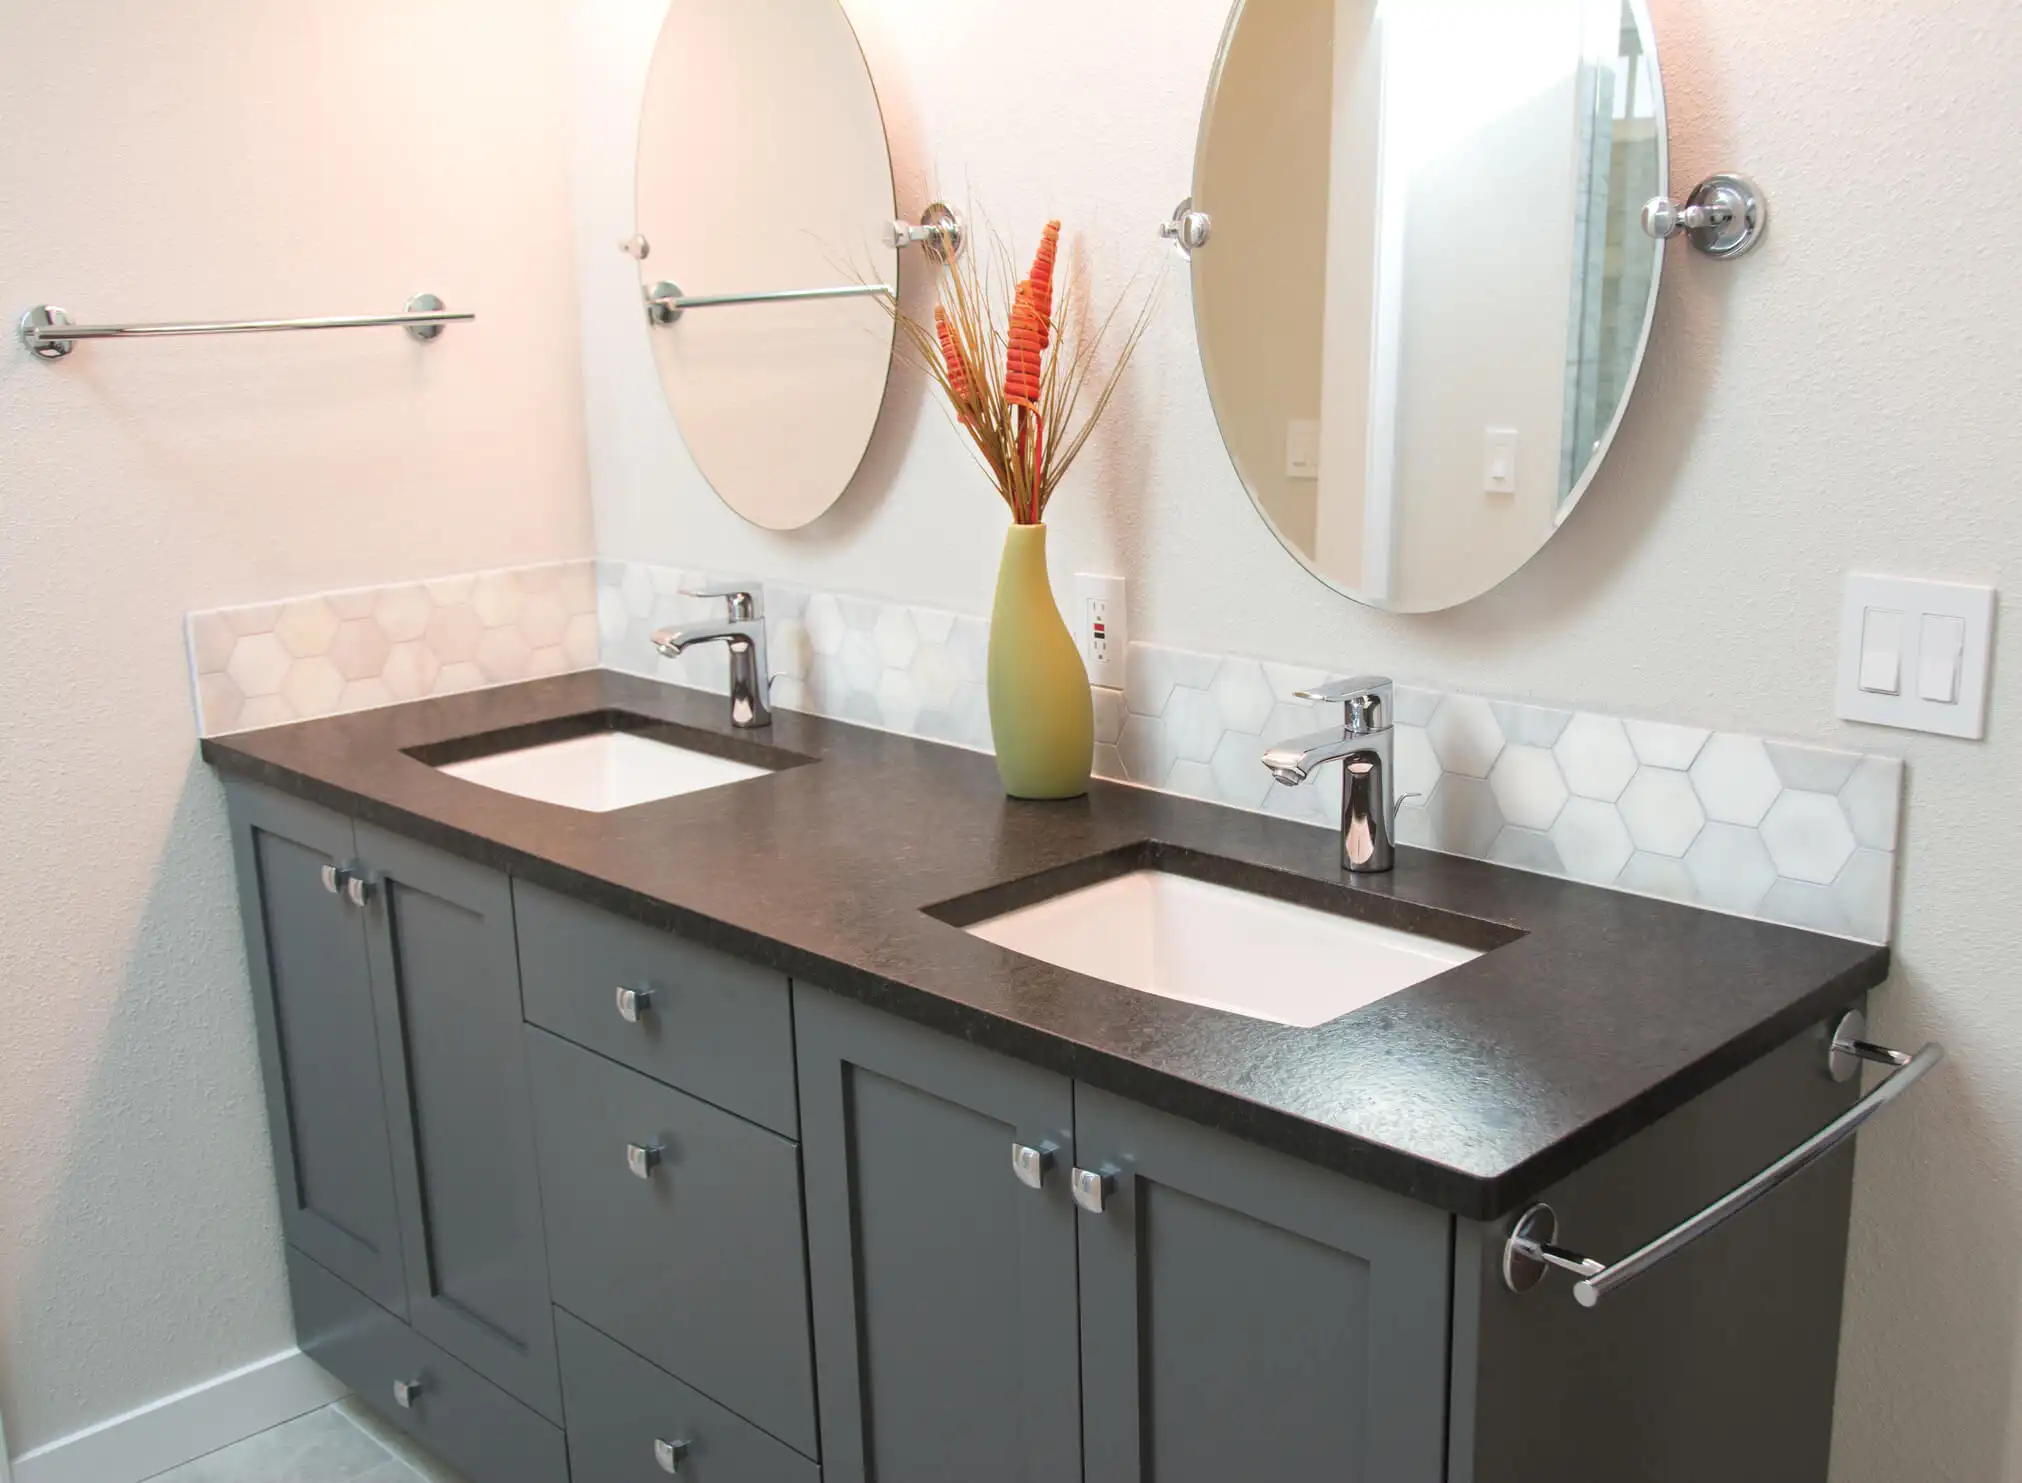 Black bathroom vanity with two sinks and two round mirrors on the gray wall